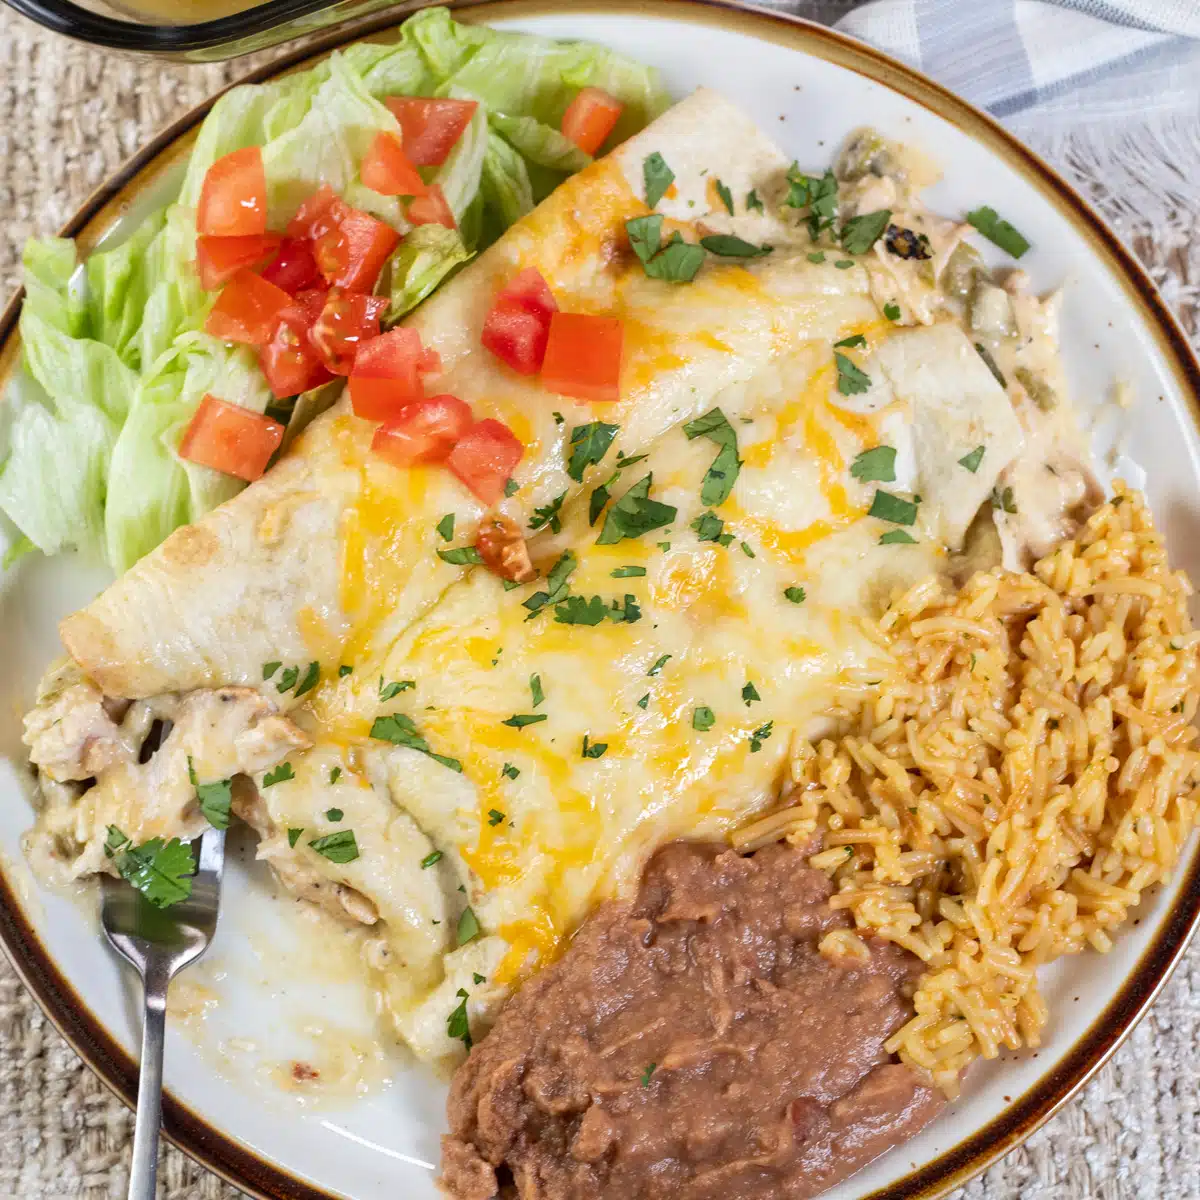 Square image of a plate of chicken enchiladas with green sauce, with a side of refried beans and Mexican rice.